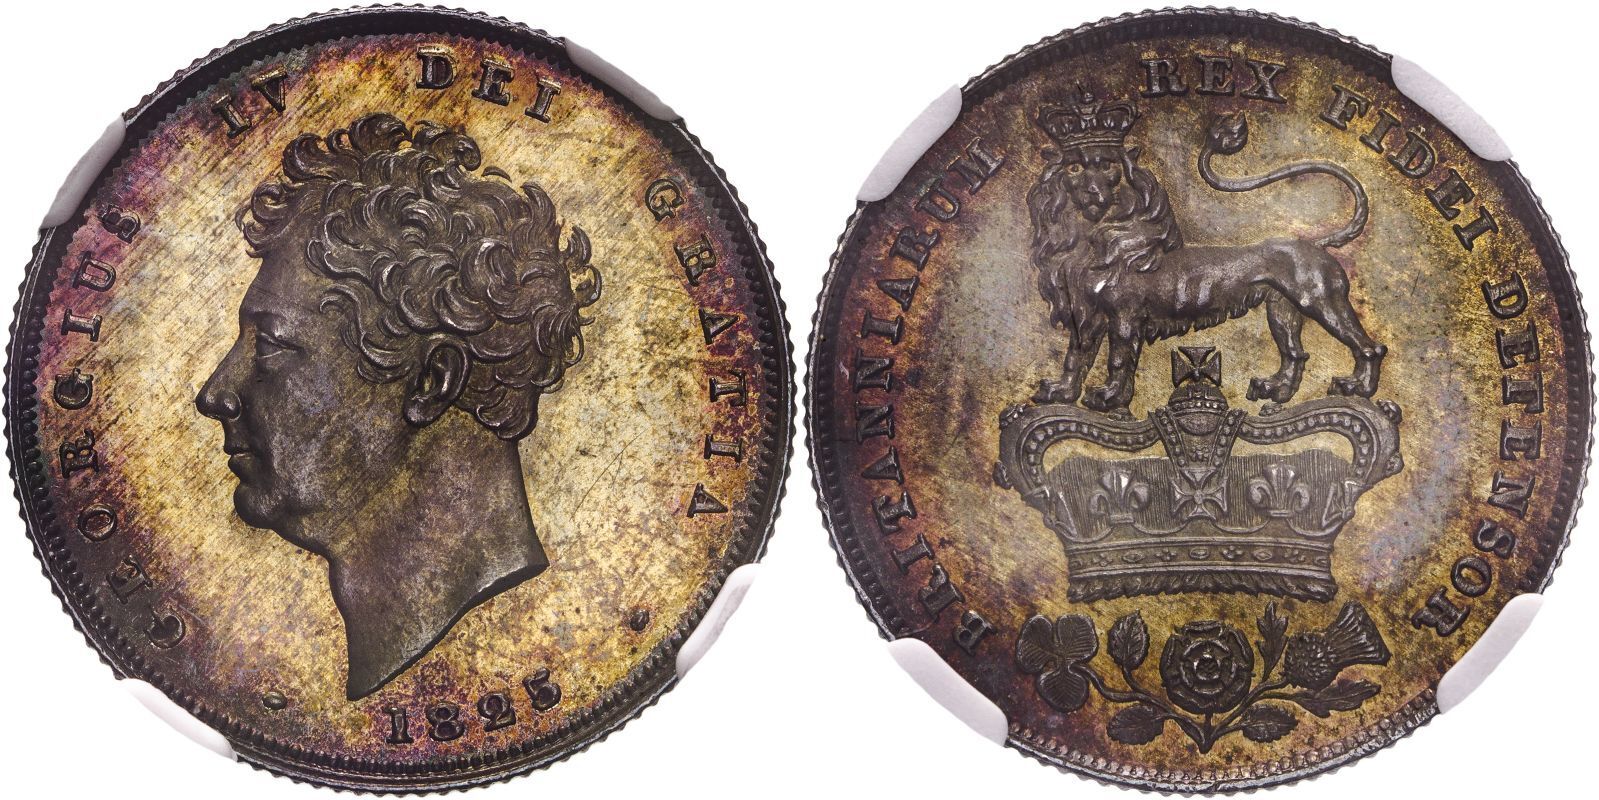 Lot 189 | United Kingdom George IV 1825 Silver Shilling Third Reverse Proof (Milled Edge) Equal-finest NGC PF 65 CAMEO #6319537-002